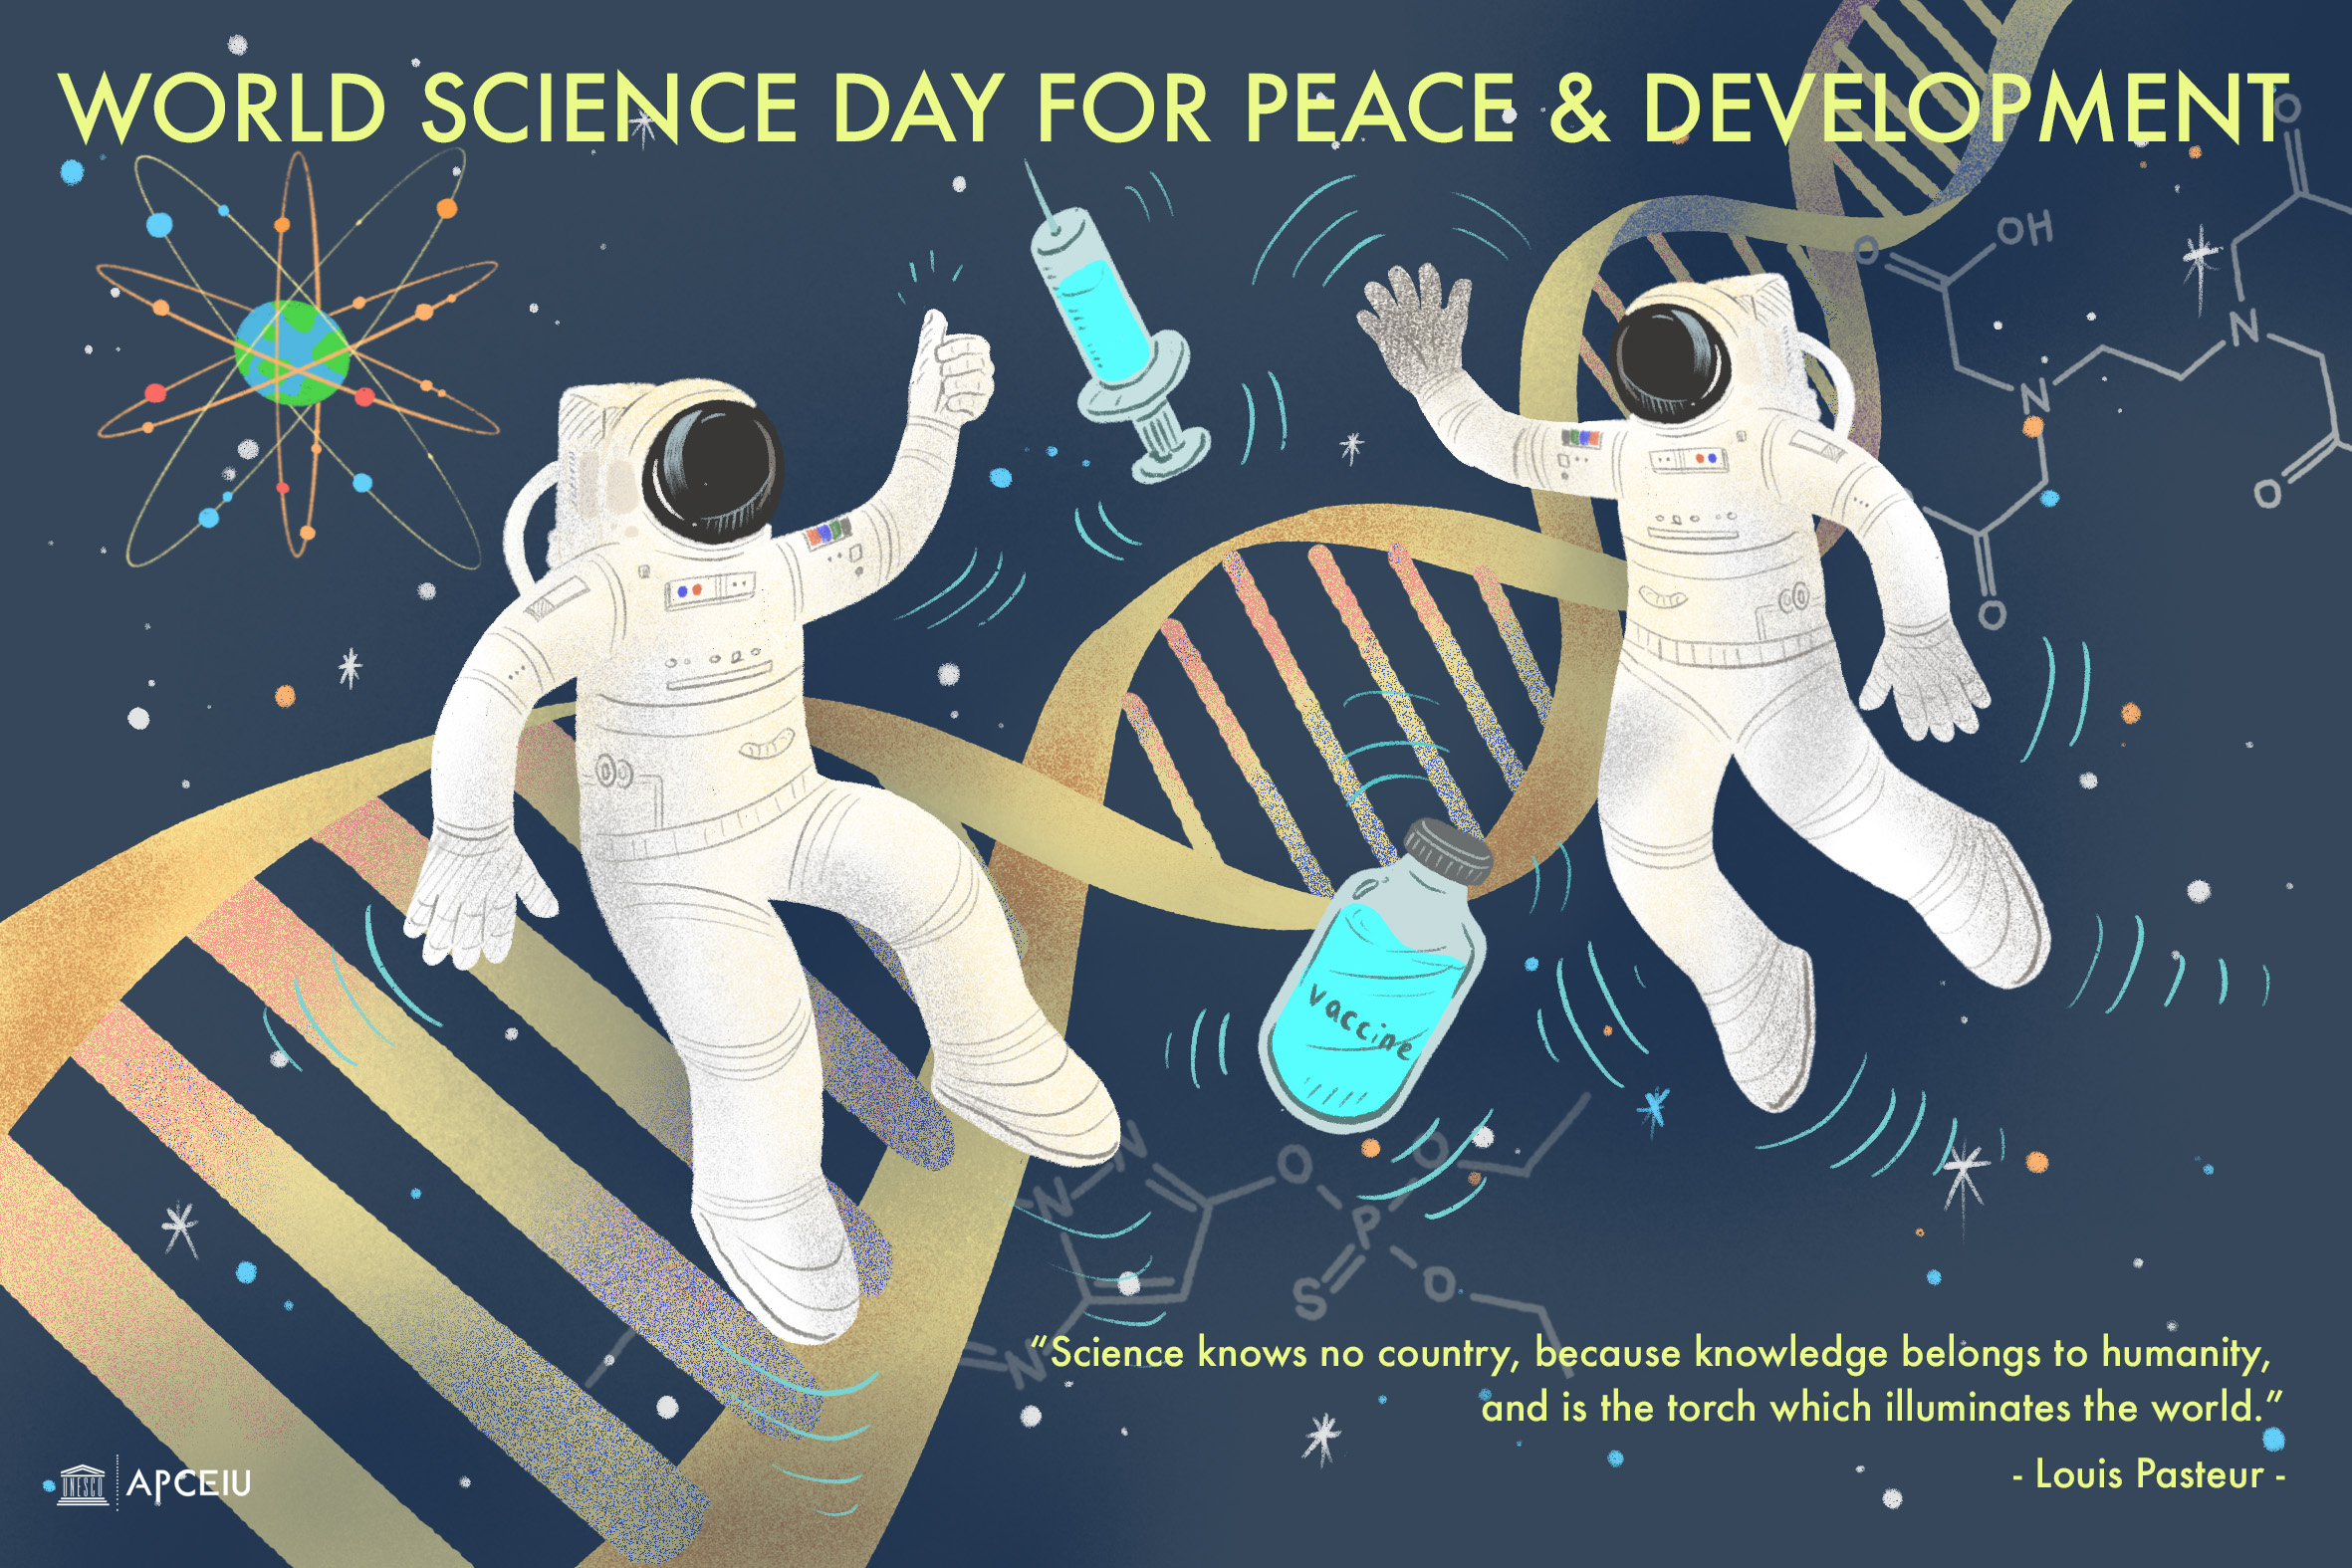 World science day for peace and development illustration.jpg